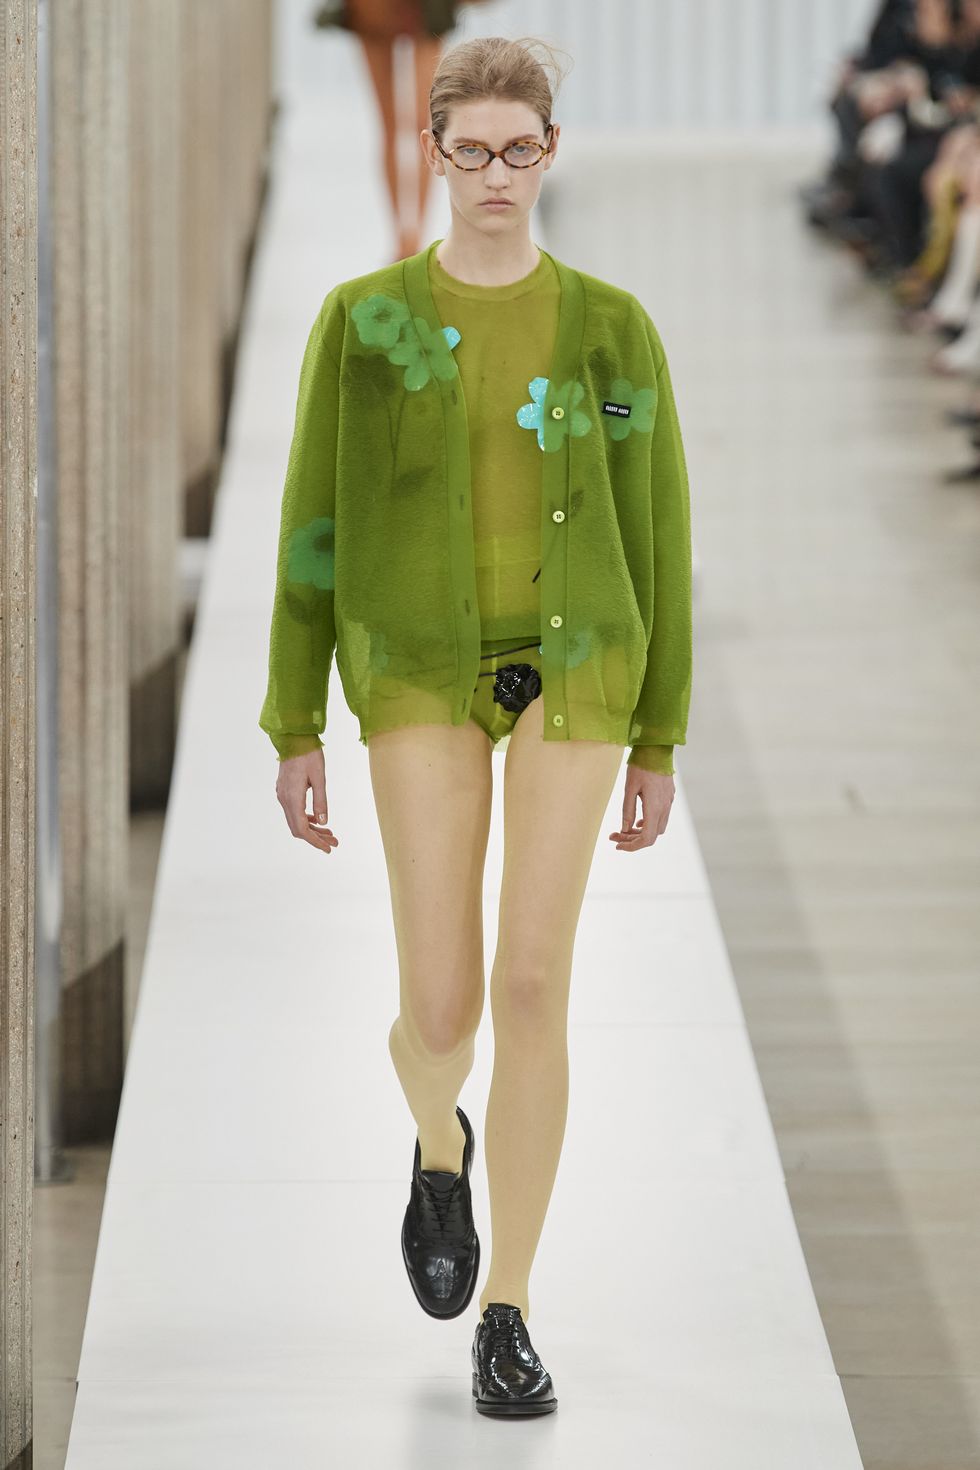 a person wearing a green jacket and black shoes walking down a runway